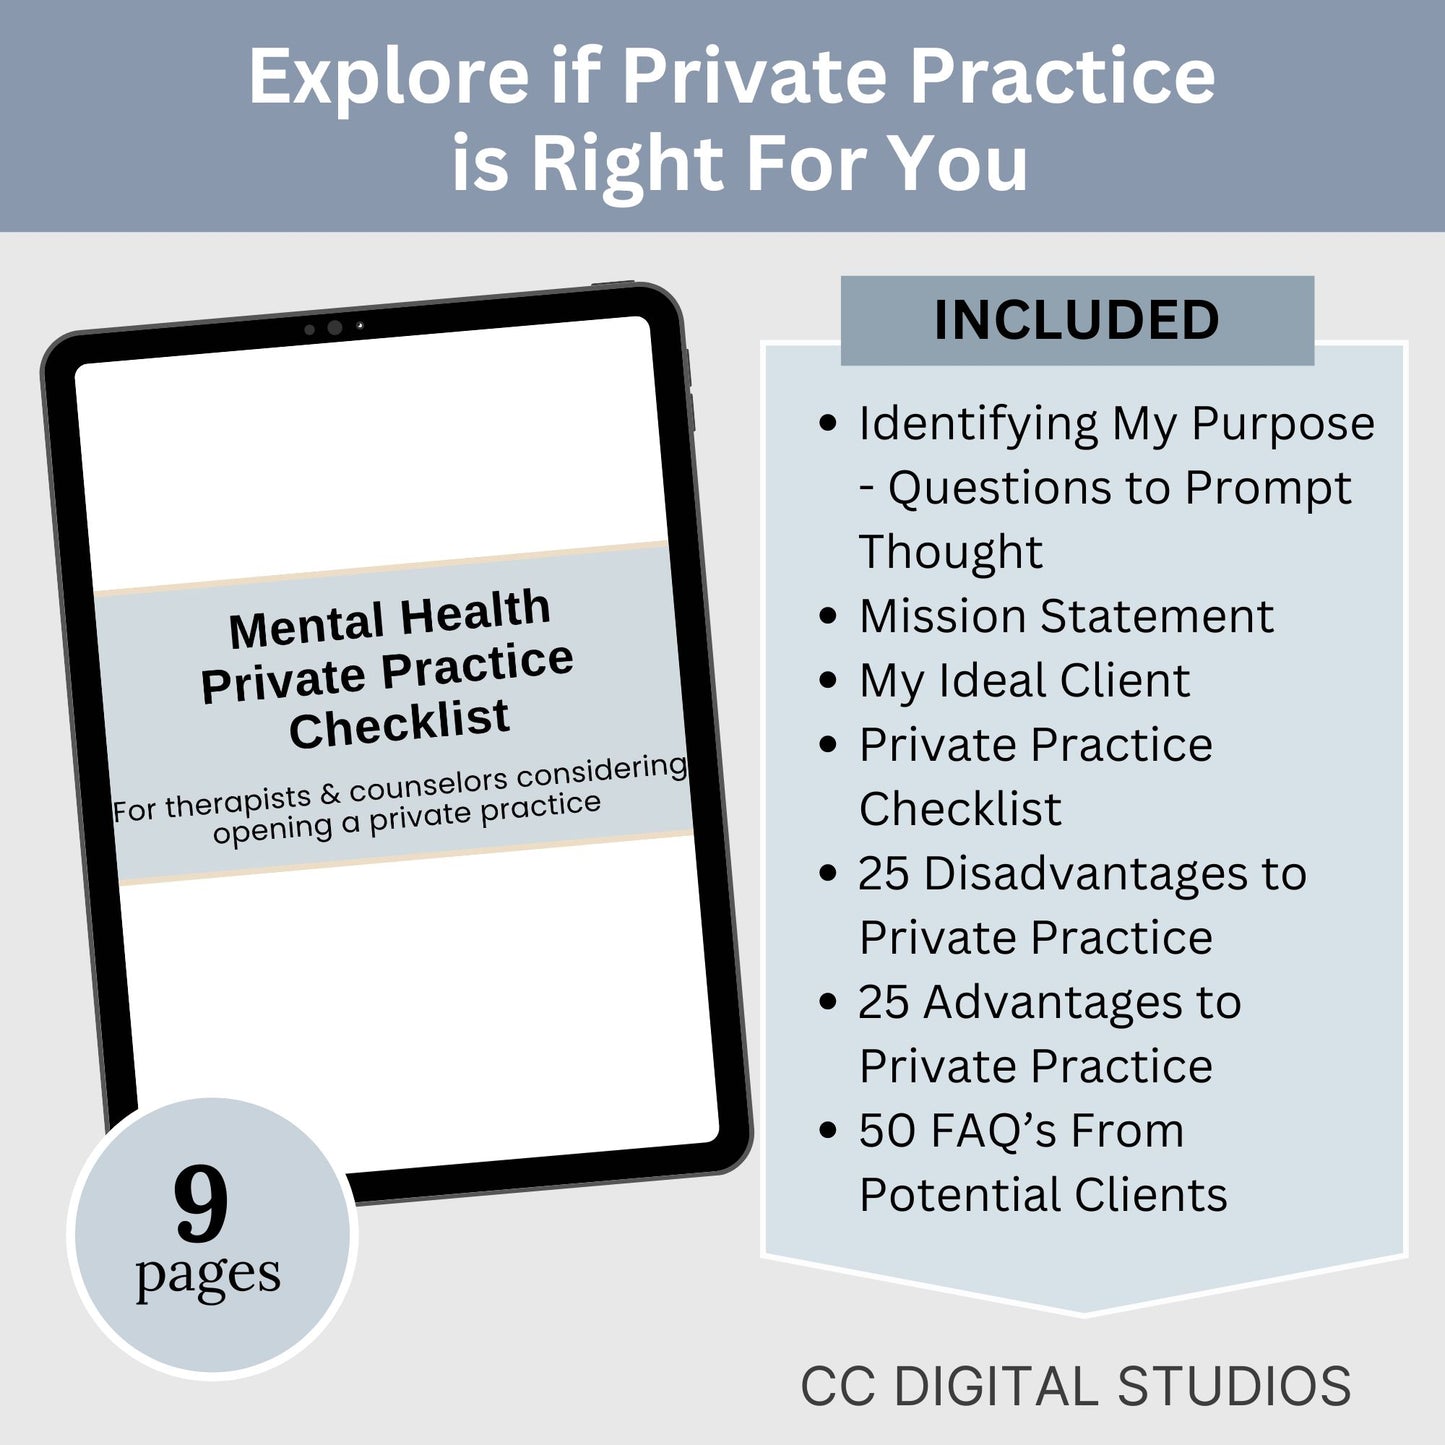 Our private practice checklist is perfect for aspiring practitioners in psychology, counseling, and therapy fields looking for a structured path to success. Mental Health Practice Guide, Counselor Business Plan, Roadmap, Mental Health Entrepreneur